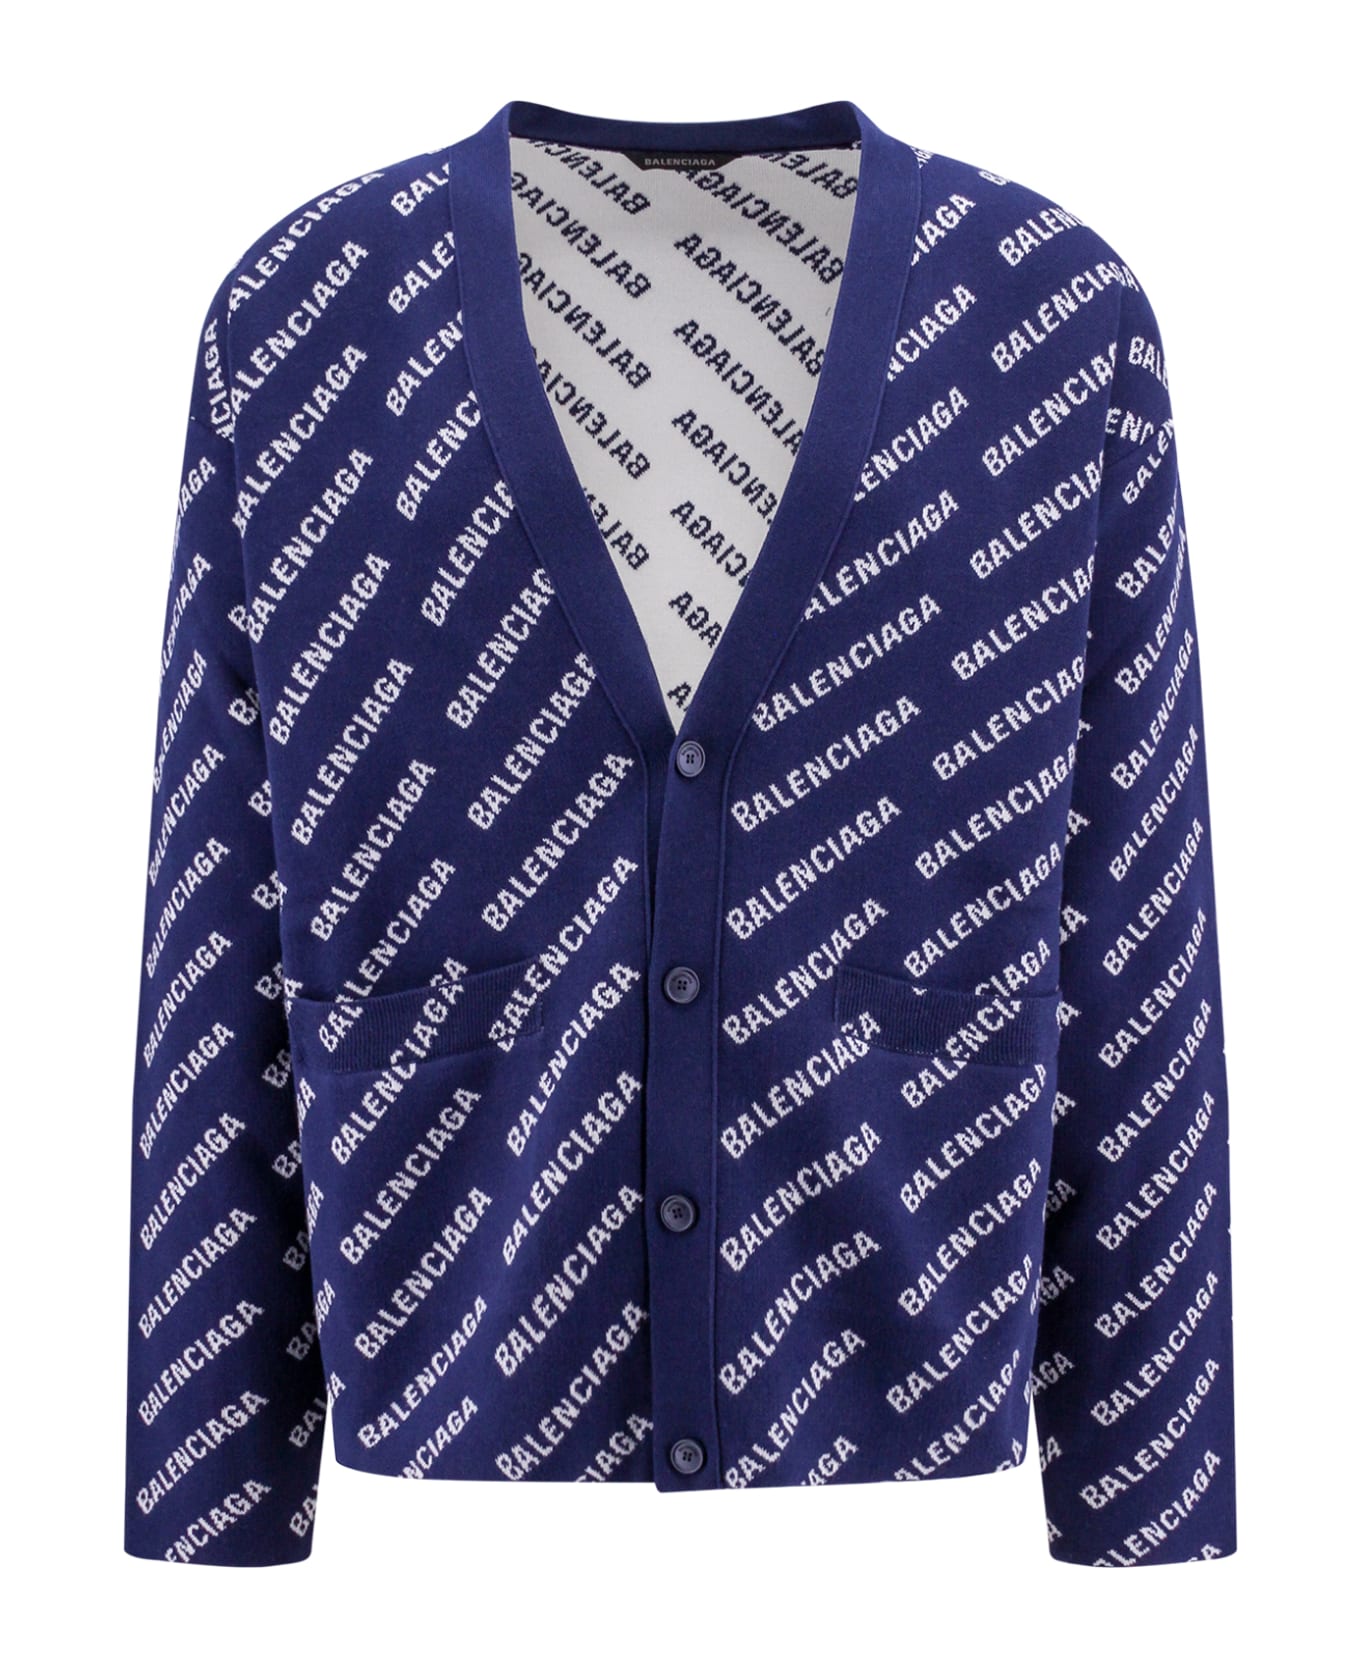 Balenciaga Embroidered Stretch Cotton Blend Oversize Cardigan - Blue カーディガン